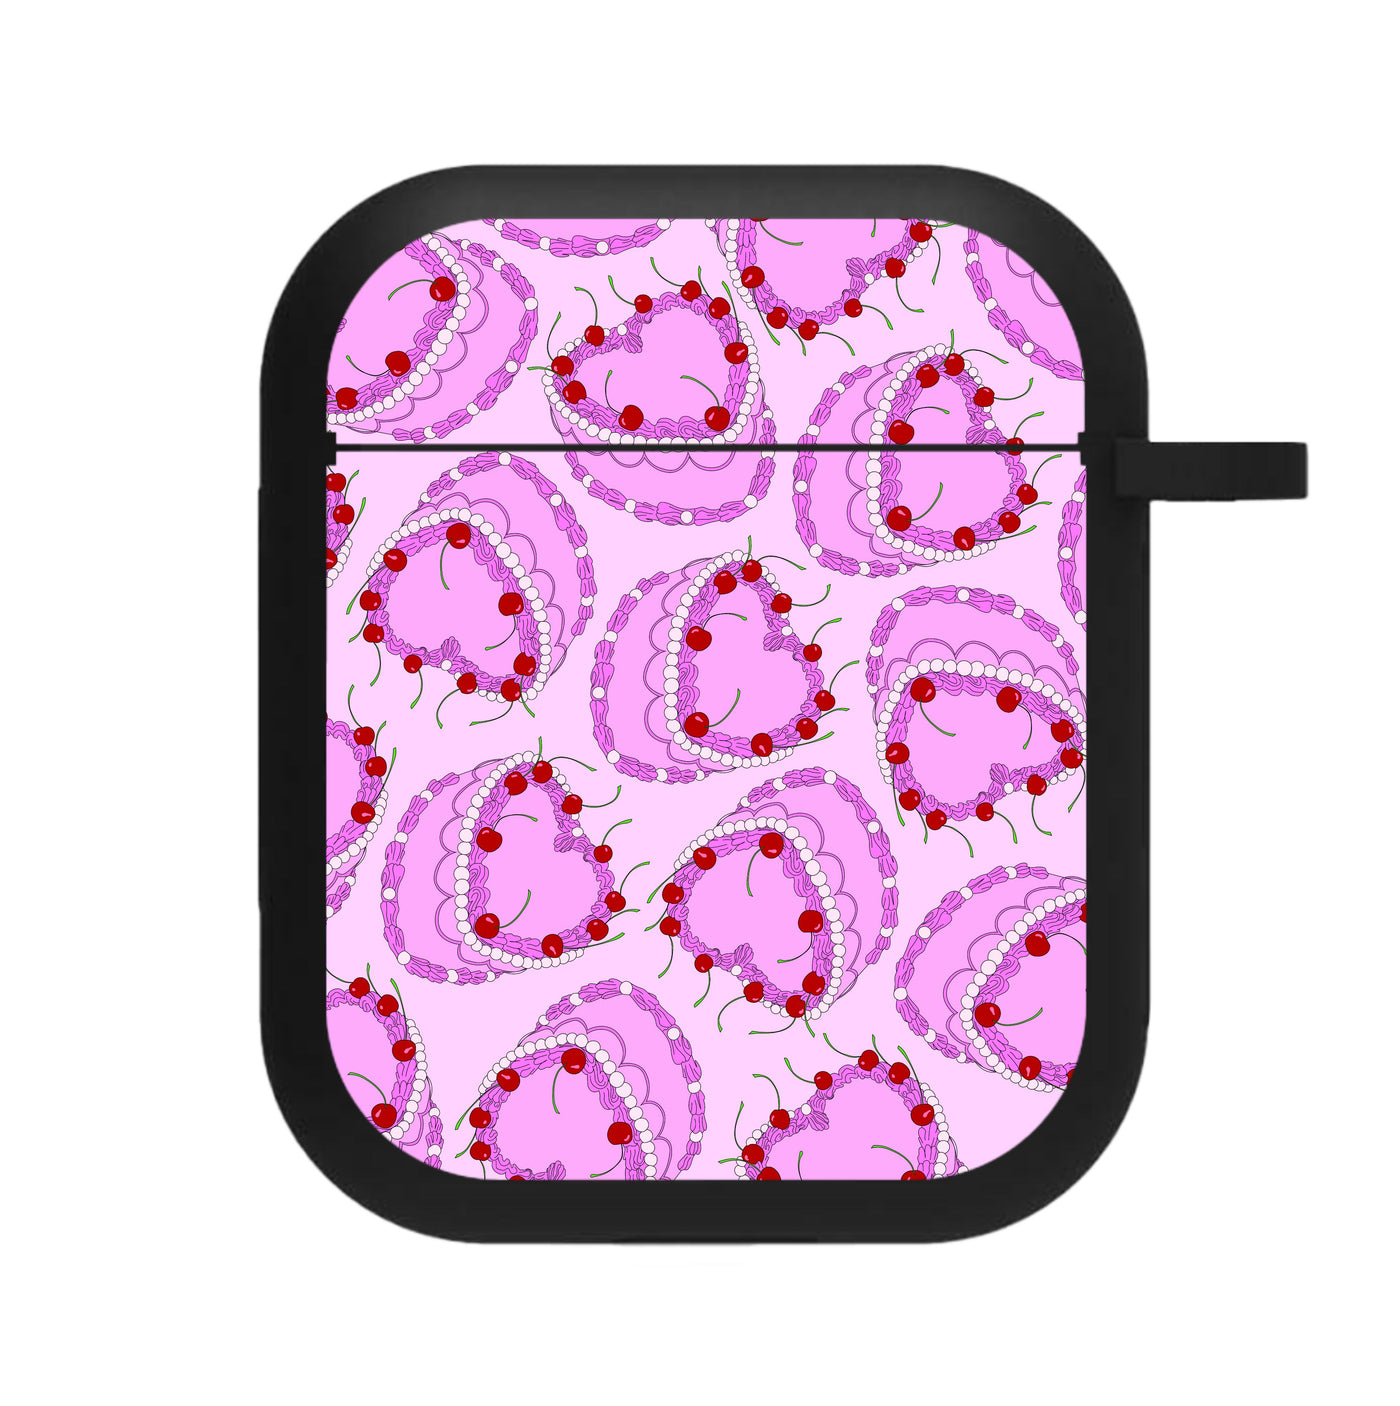 Cakes - Valentine's Day AirPods Case